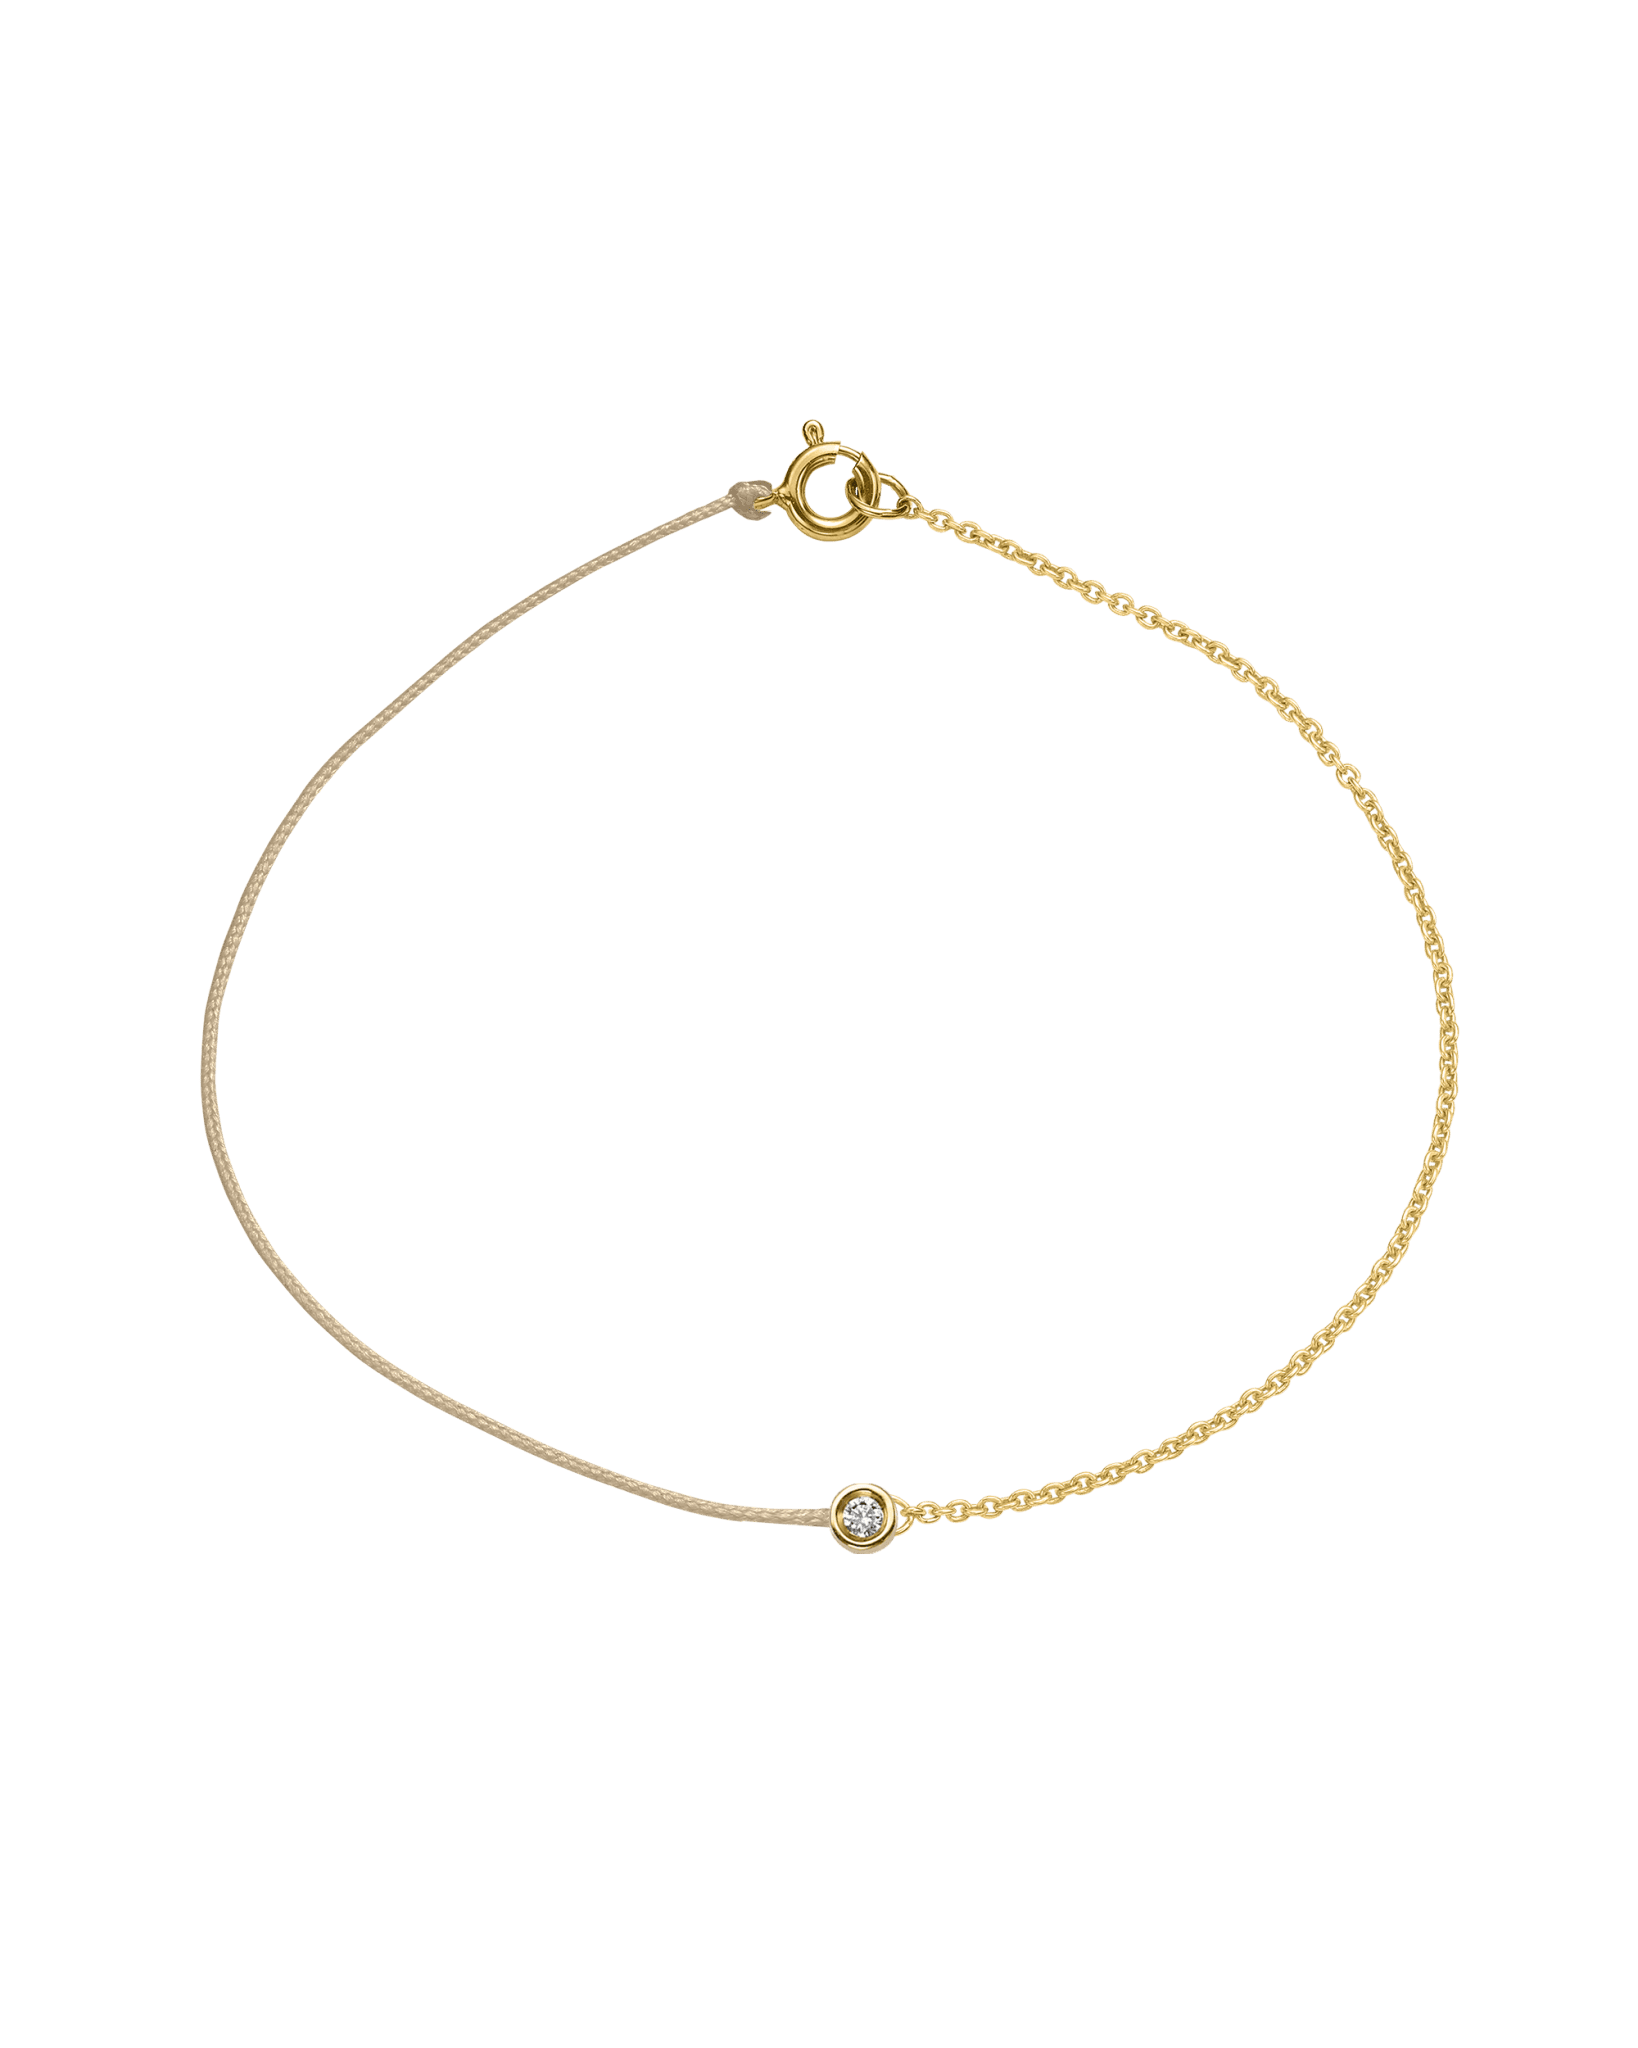 The Half Chain String of Love - 14K Yellow Gold Bracelet 14K Solid Gold Beige Small: 0.03ct Small 6 Inches